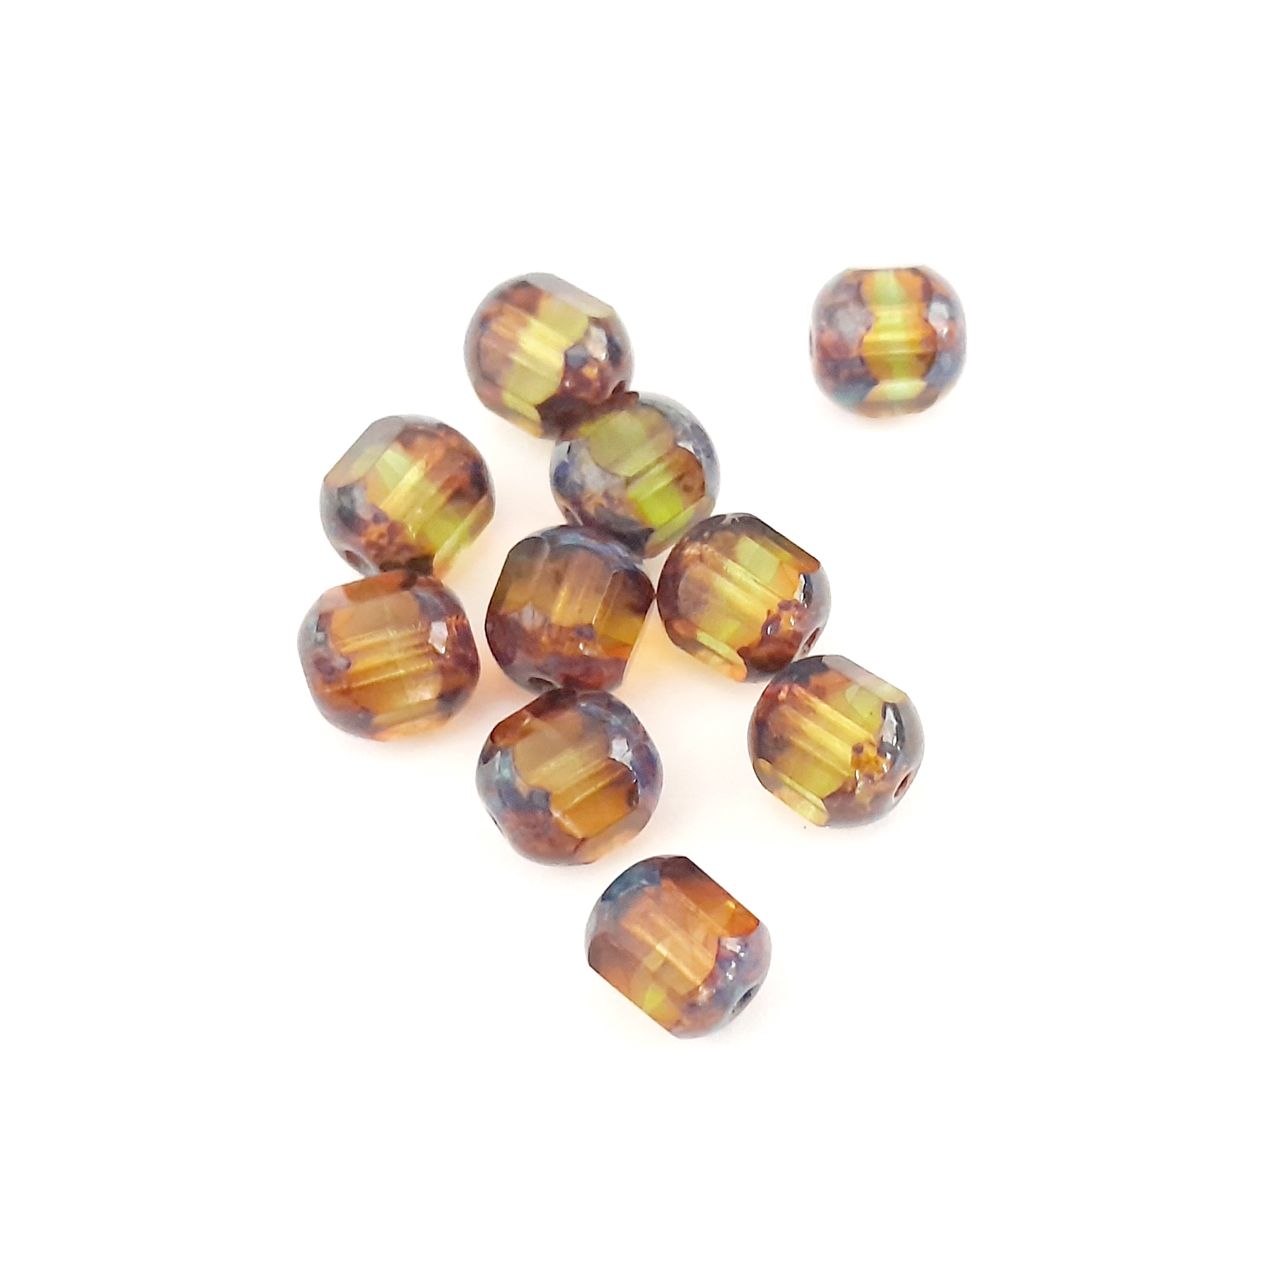 Cathedral Czech Glass Bead Barrel 7mm Transparent Olive Topaz Picasso Crown